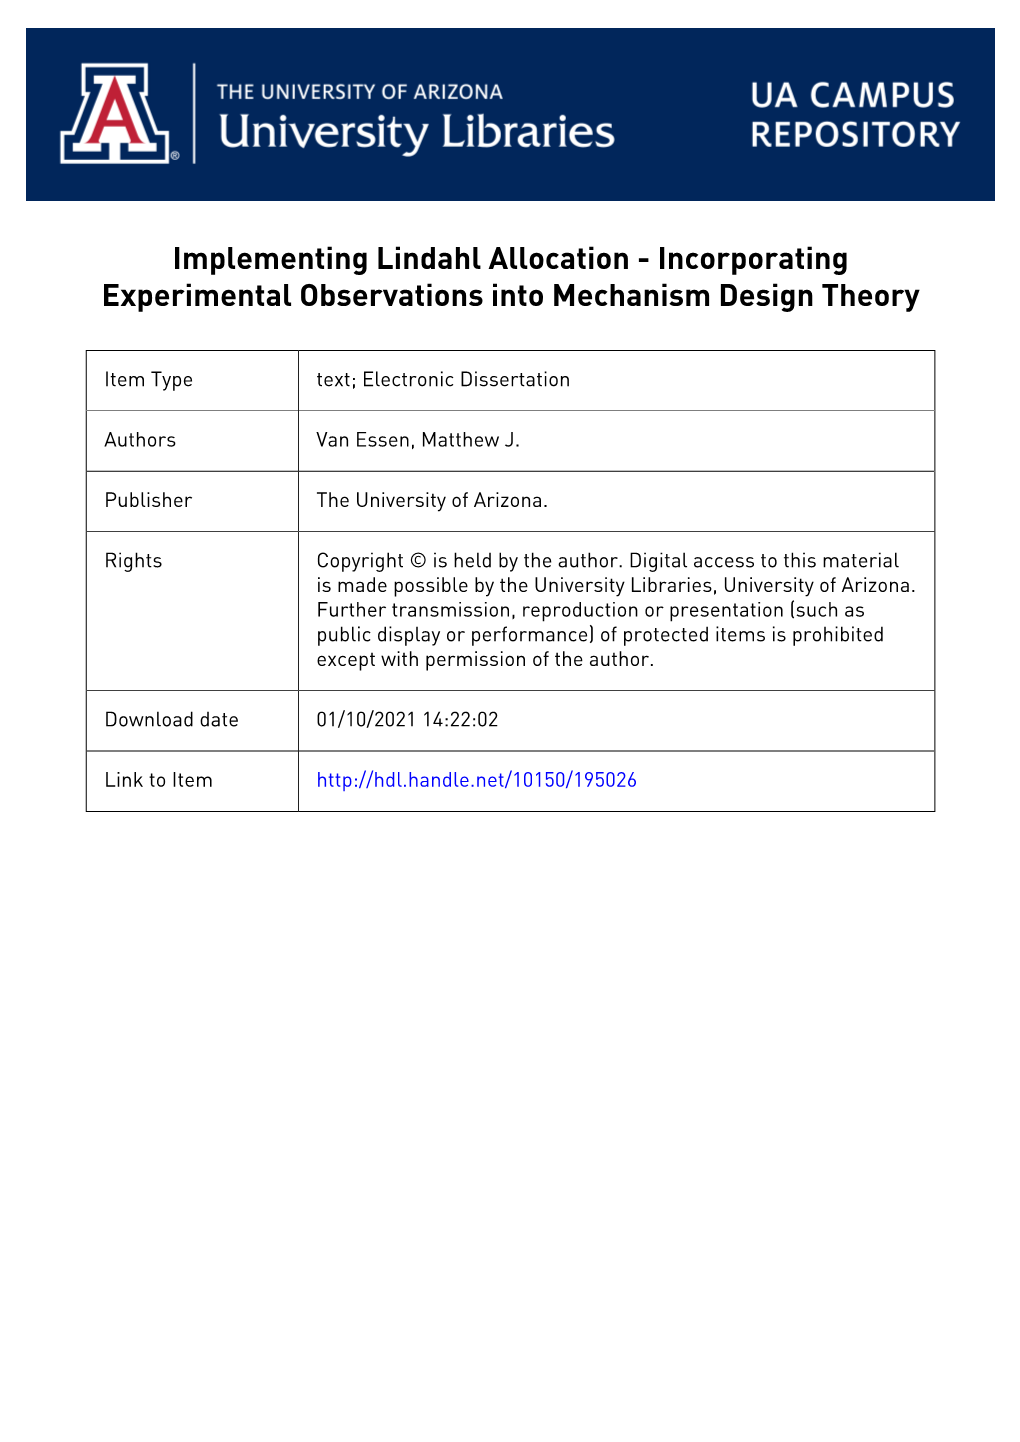 Implementing Lindahl Allocations — Incorporating Experimental